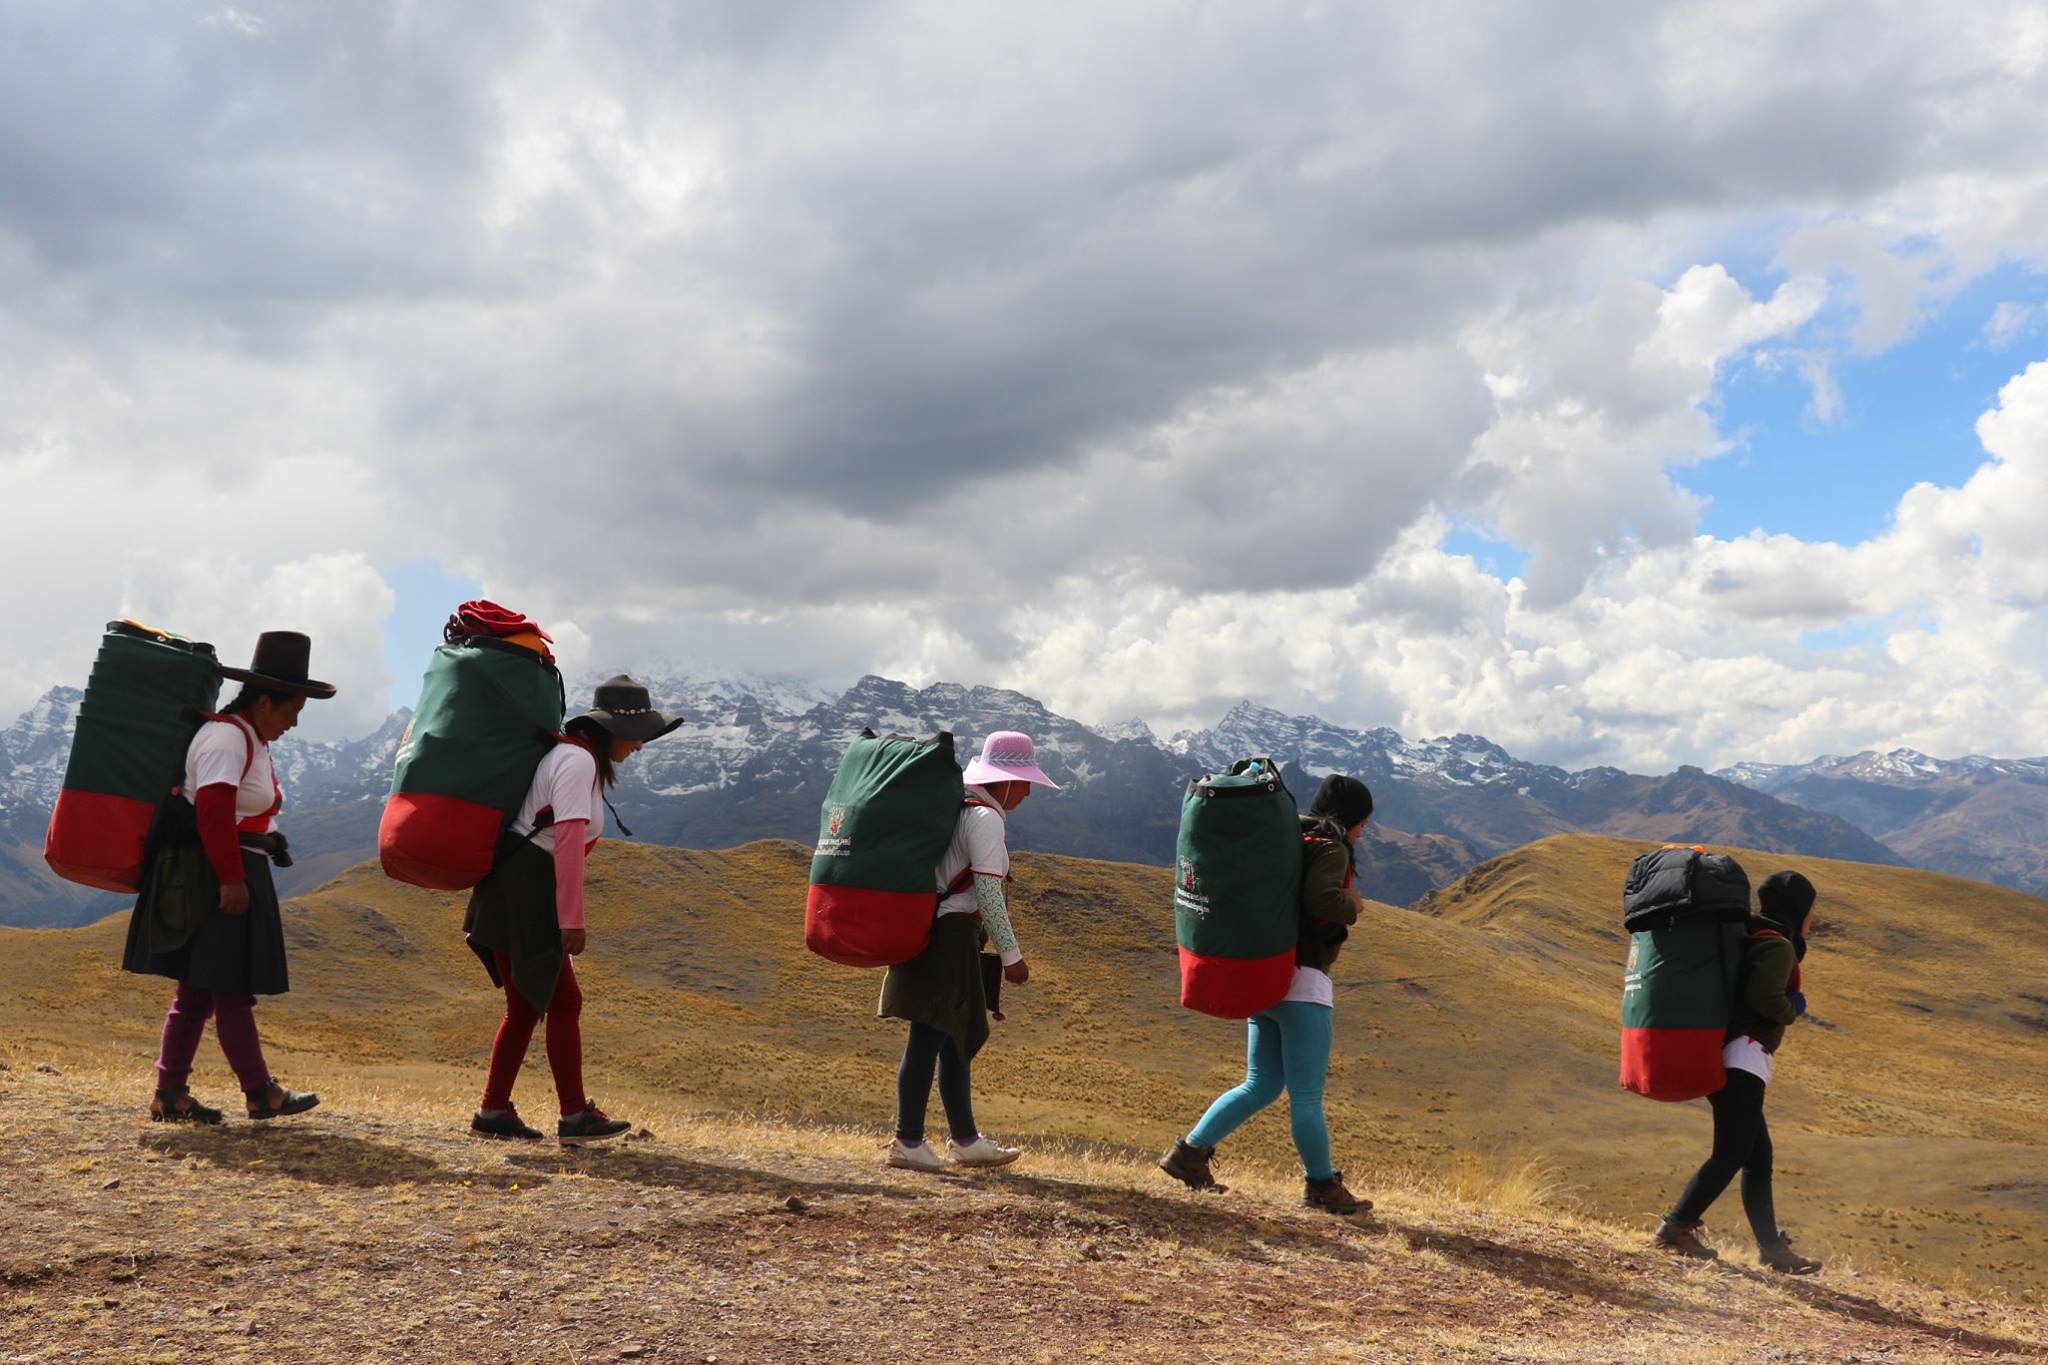 Sustainable Travel & The Inclusion Of Women In Peru. When Others Go Low, We Go High